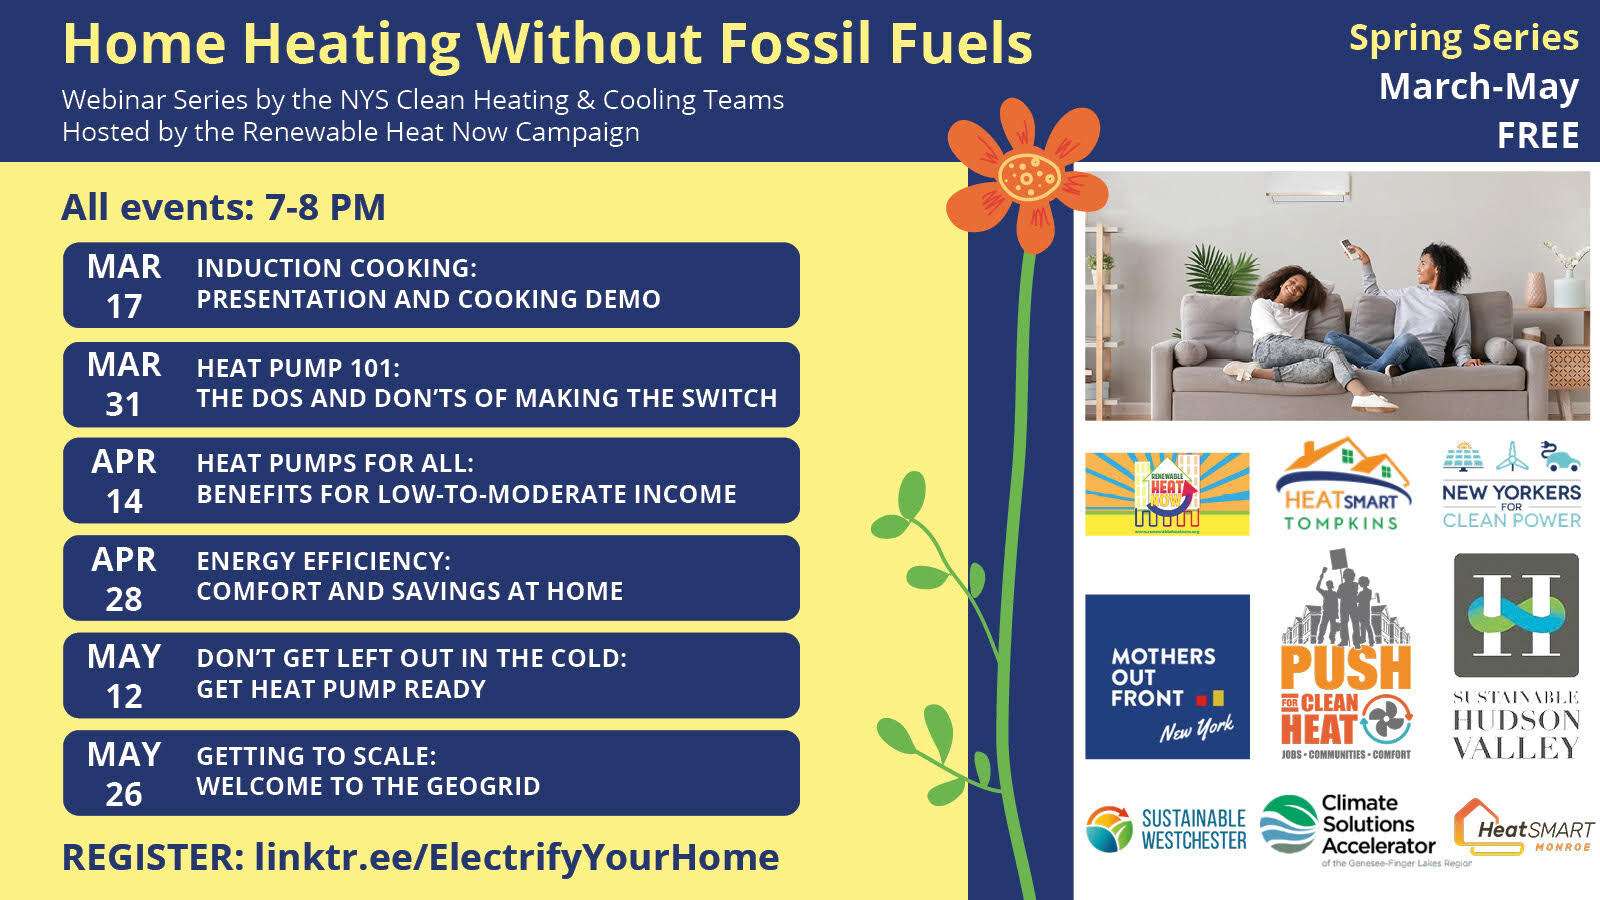 Home Heating without Fossil Fuels, statewide electrification – April 28th and May 12